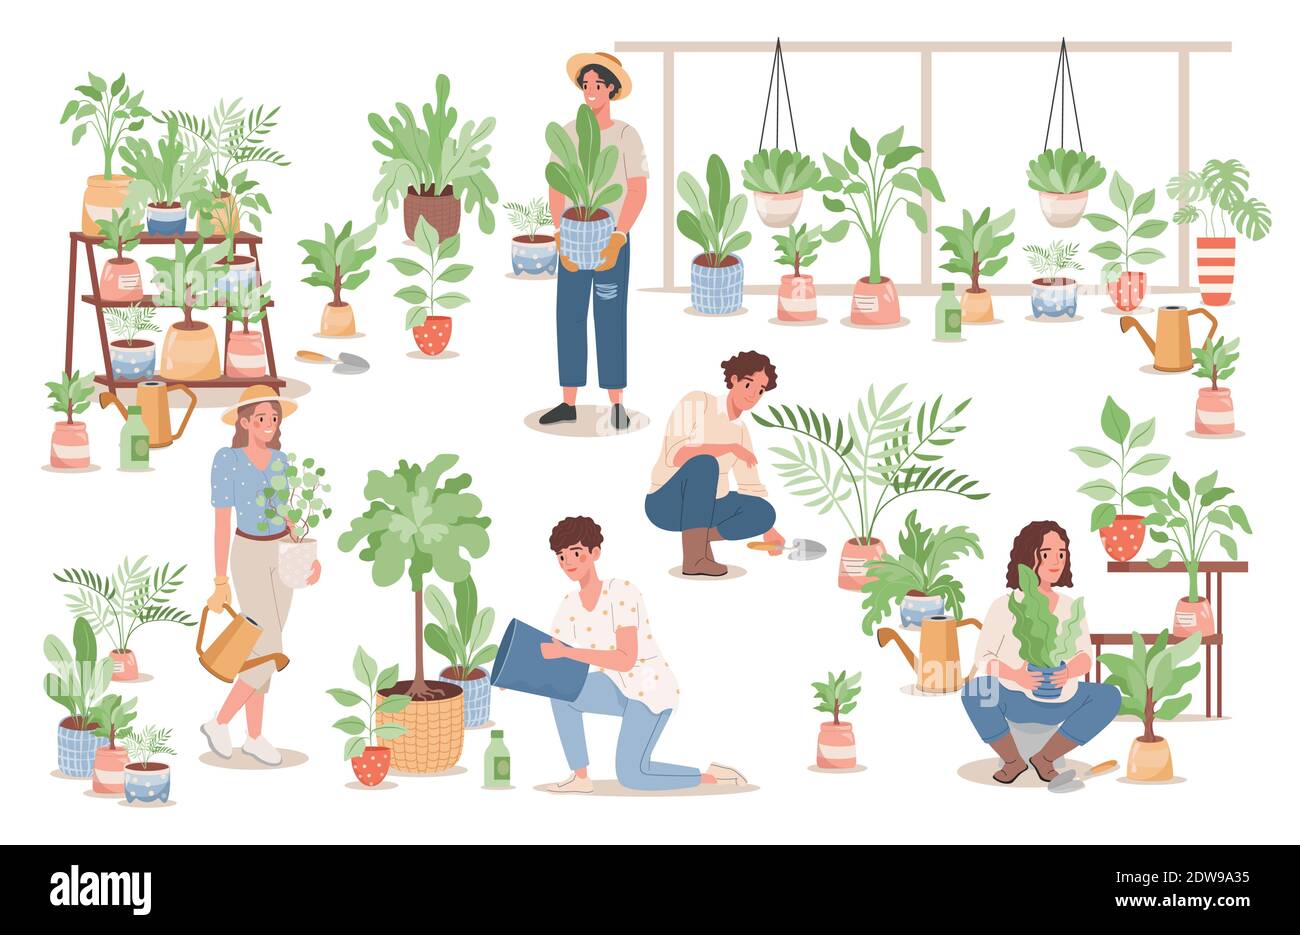 Group of happy young people taking care of home plants vector flat illustration. Men and women in casual clothes watering flowers, growing plants in pots. Agriculture gardener hobby concept. Stock Vector